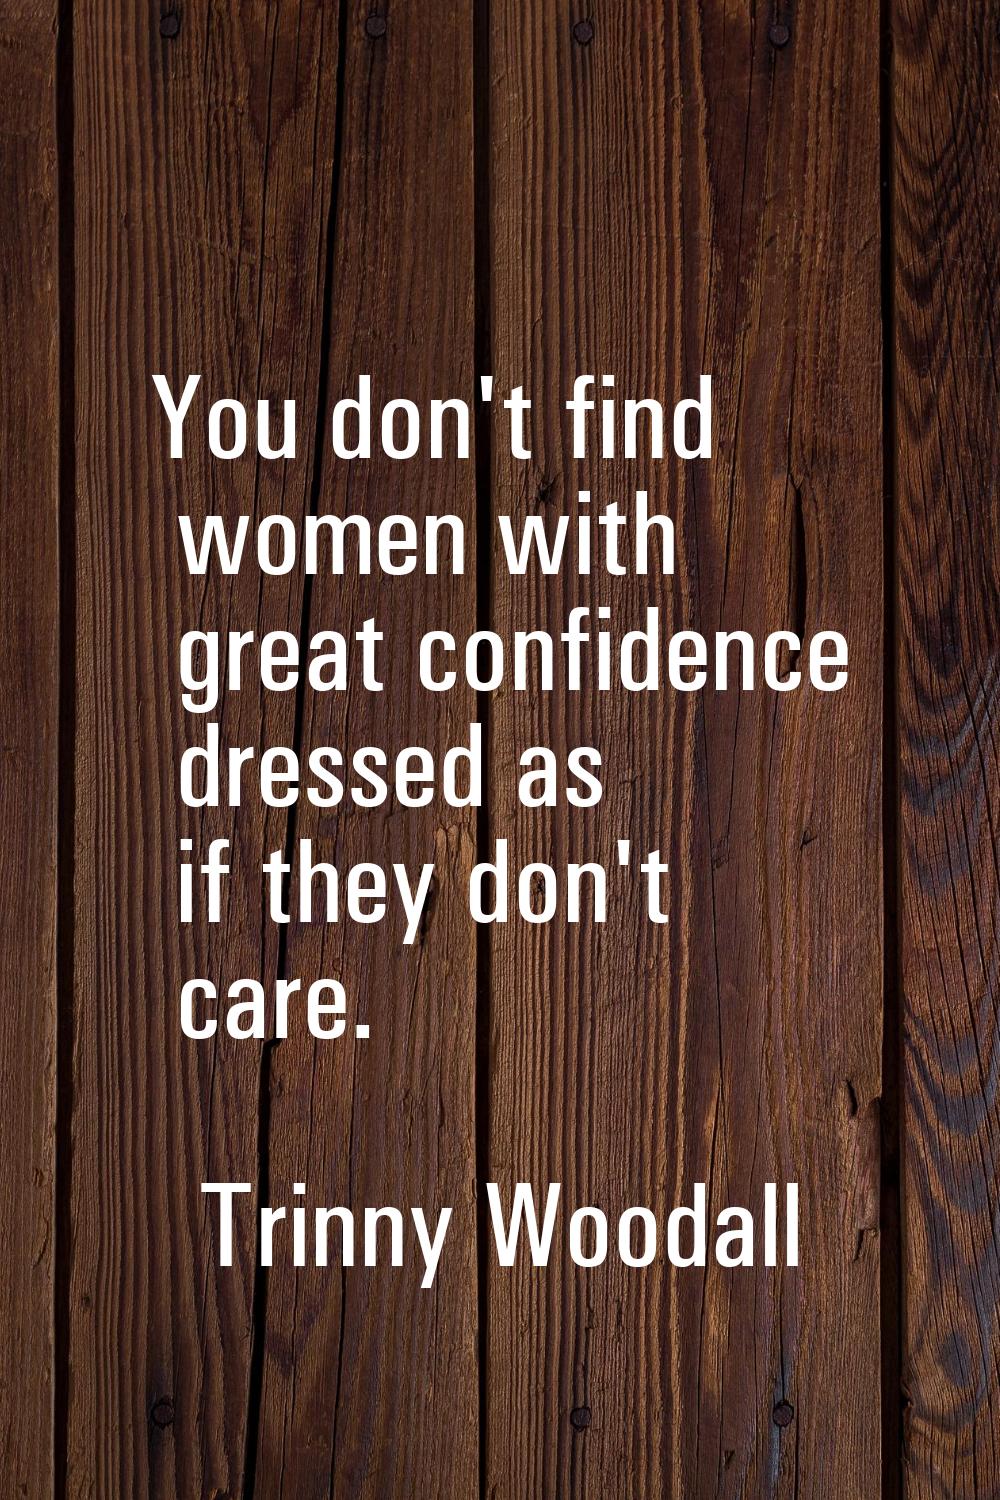 You don't find women with great confidence dressed as if they don't care.